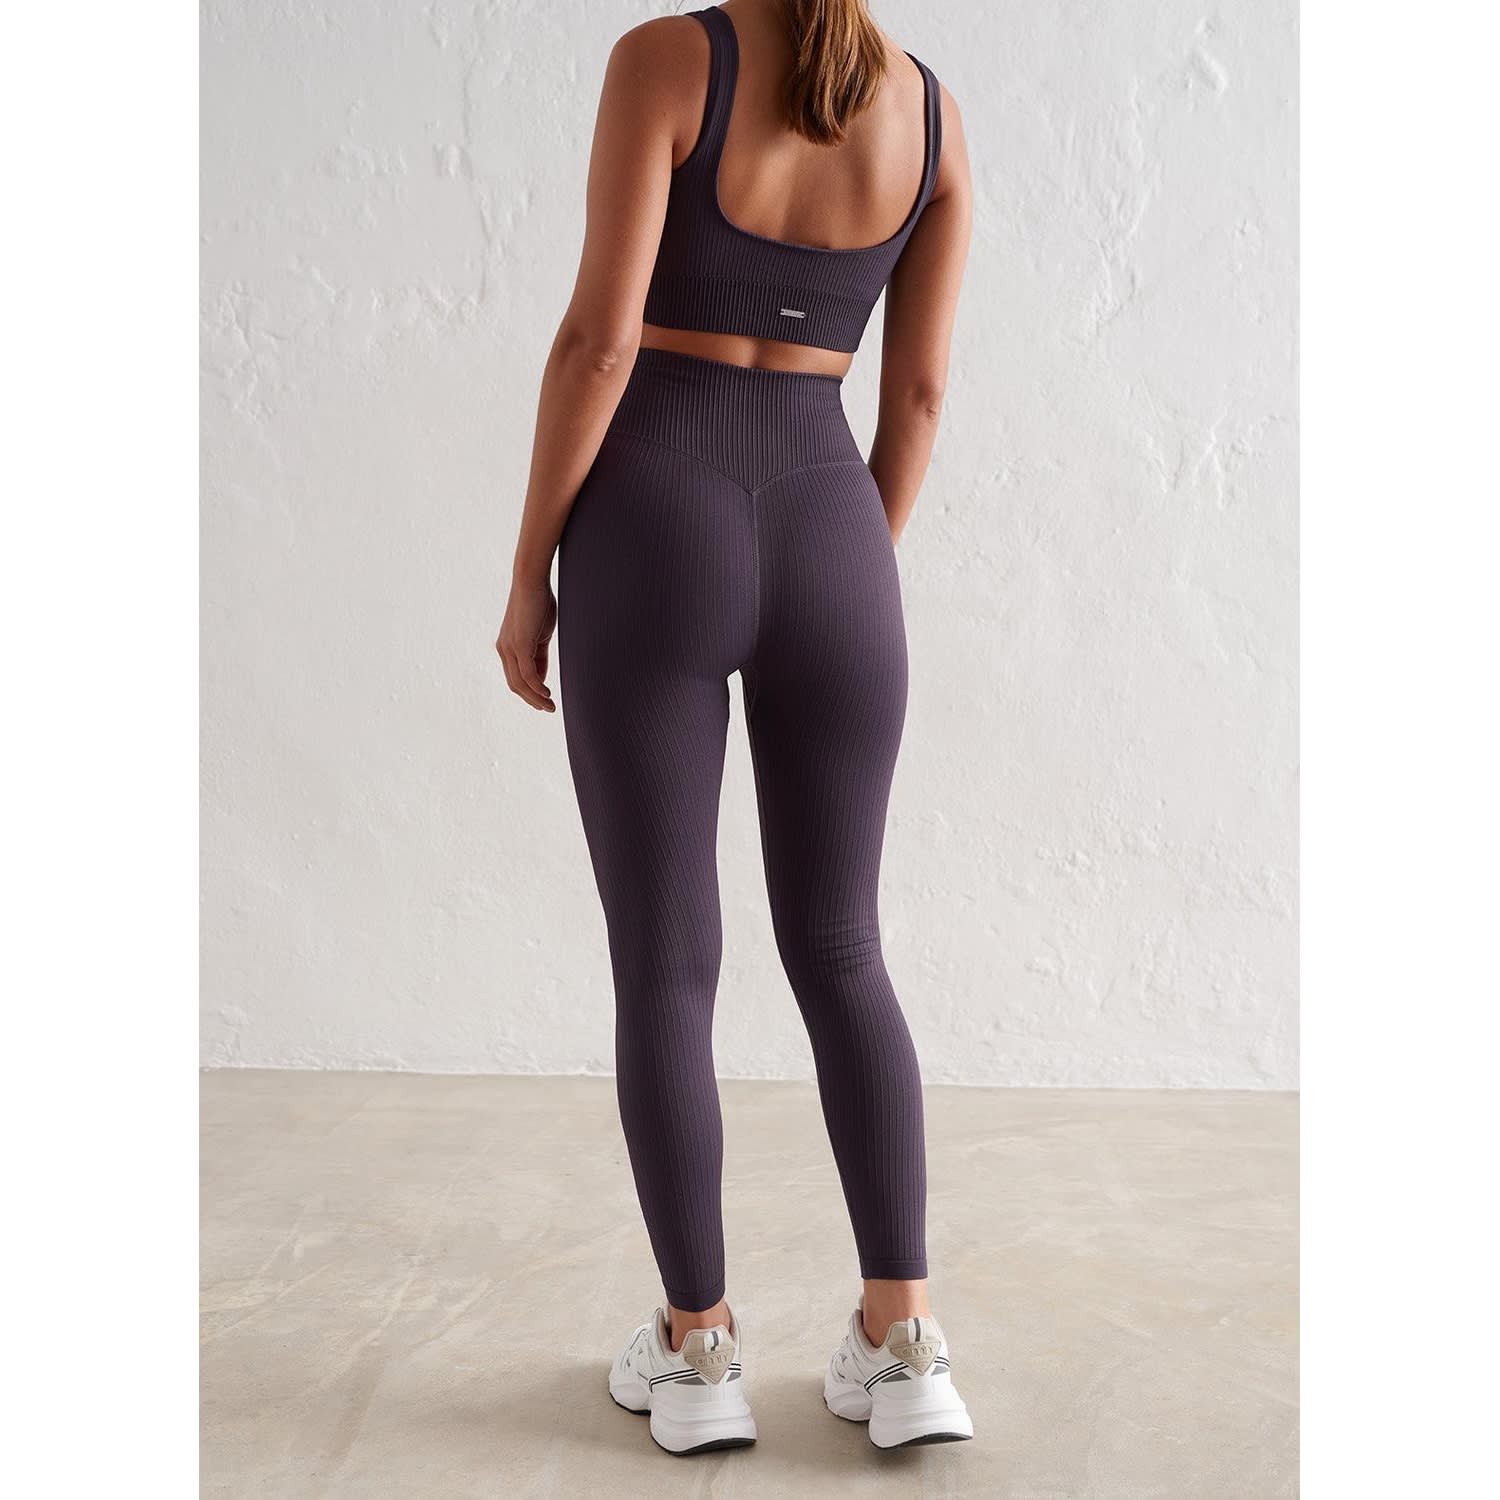 Plum Ribbed Seamless Tights